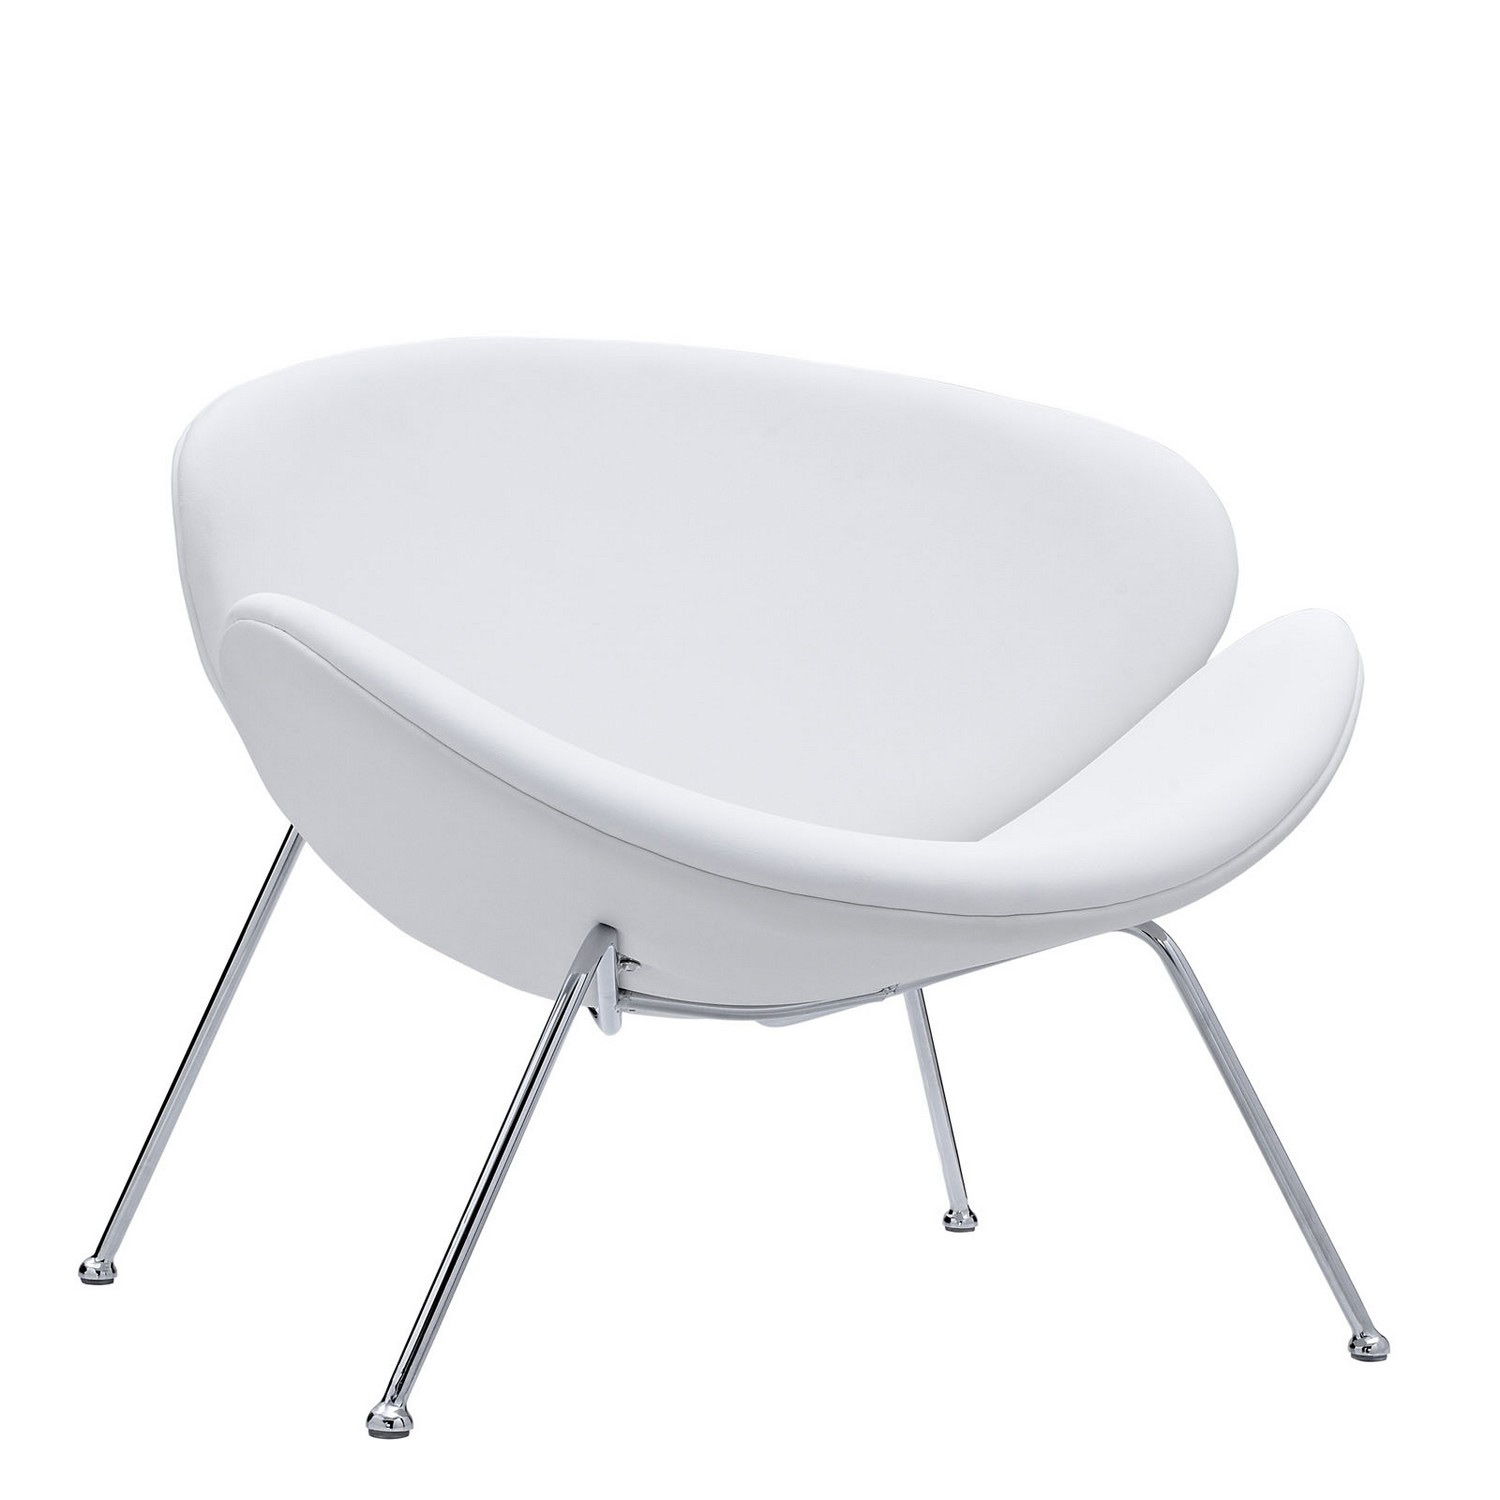 Modway Nutshell Lounge Chair - White